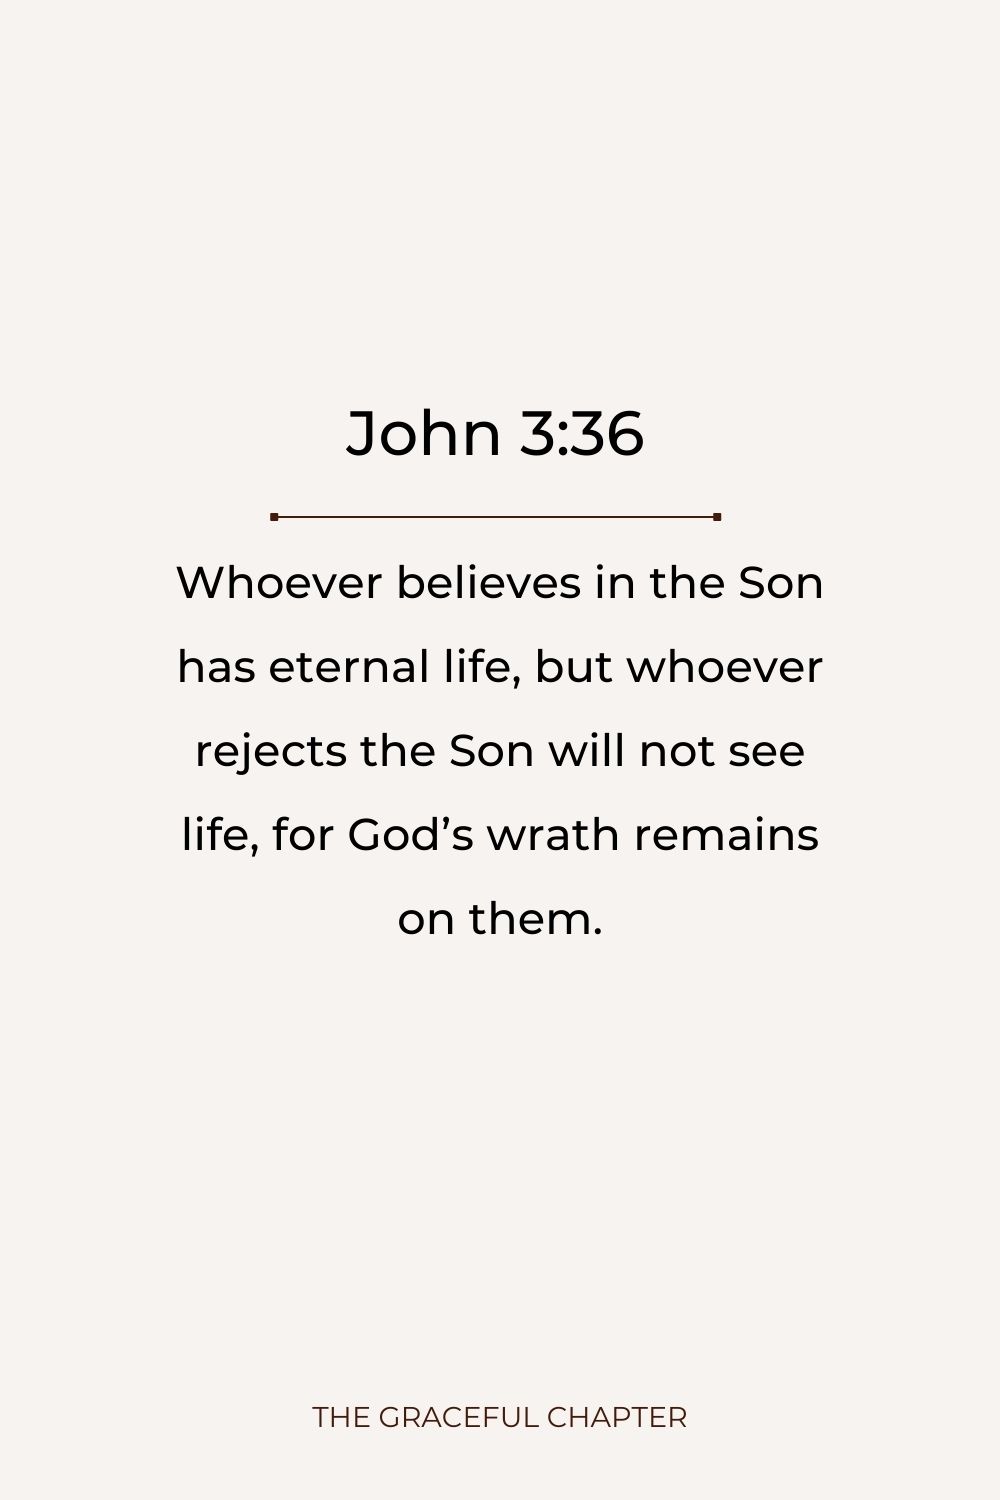 Whoever believes in the Son has eternal life, but whoever rejects the Son will not see life, for God’s wrath remains on them. John 3:36